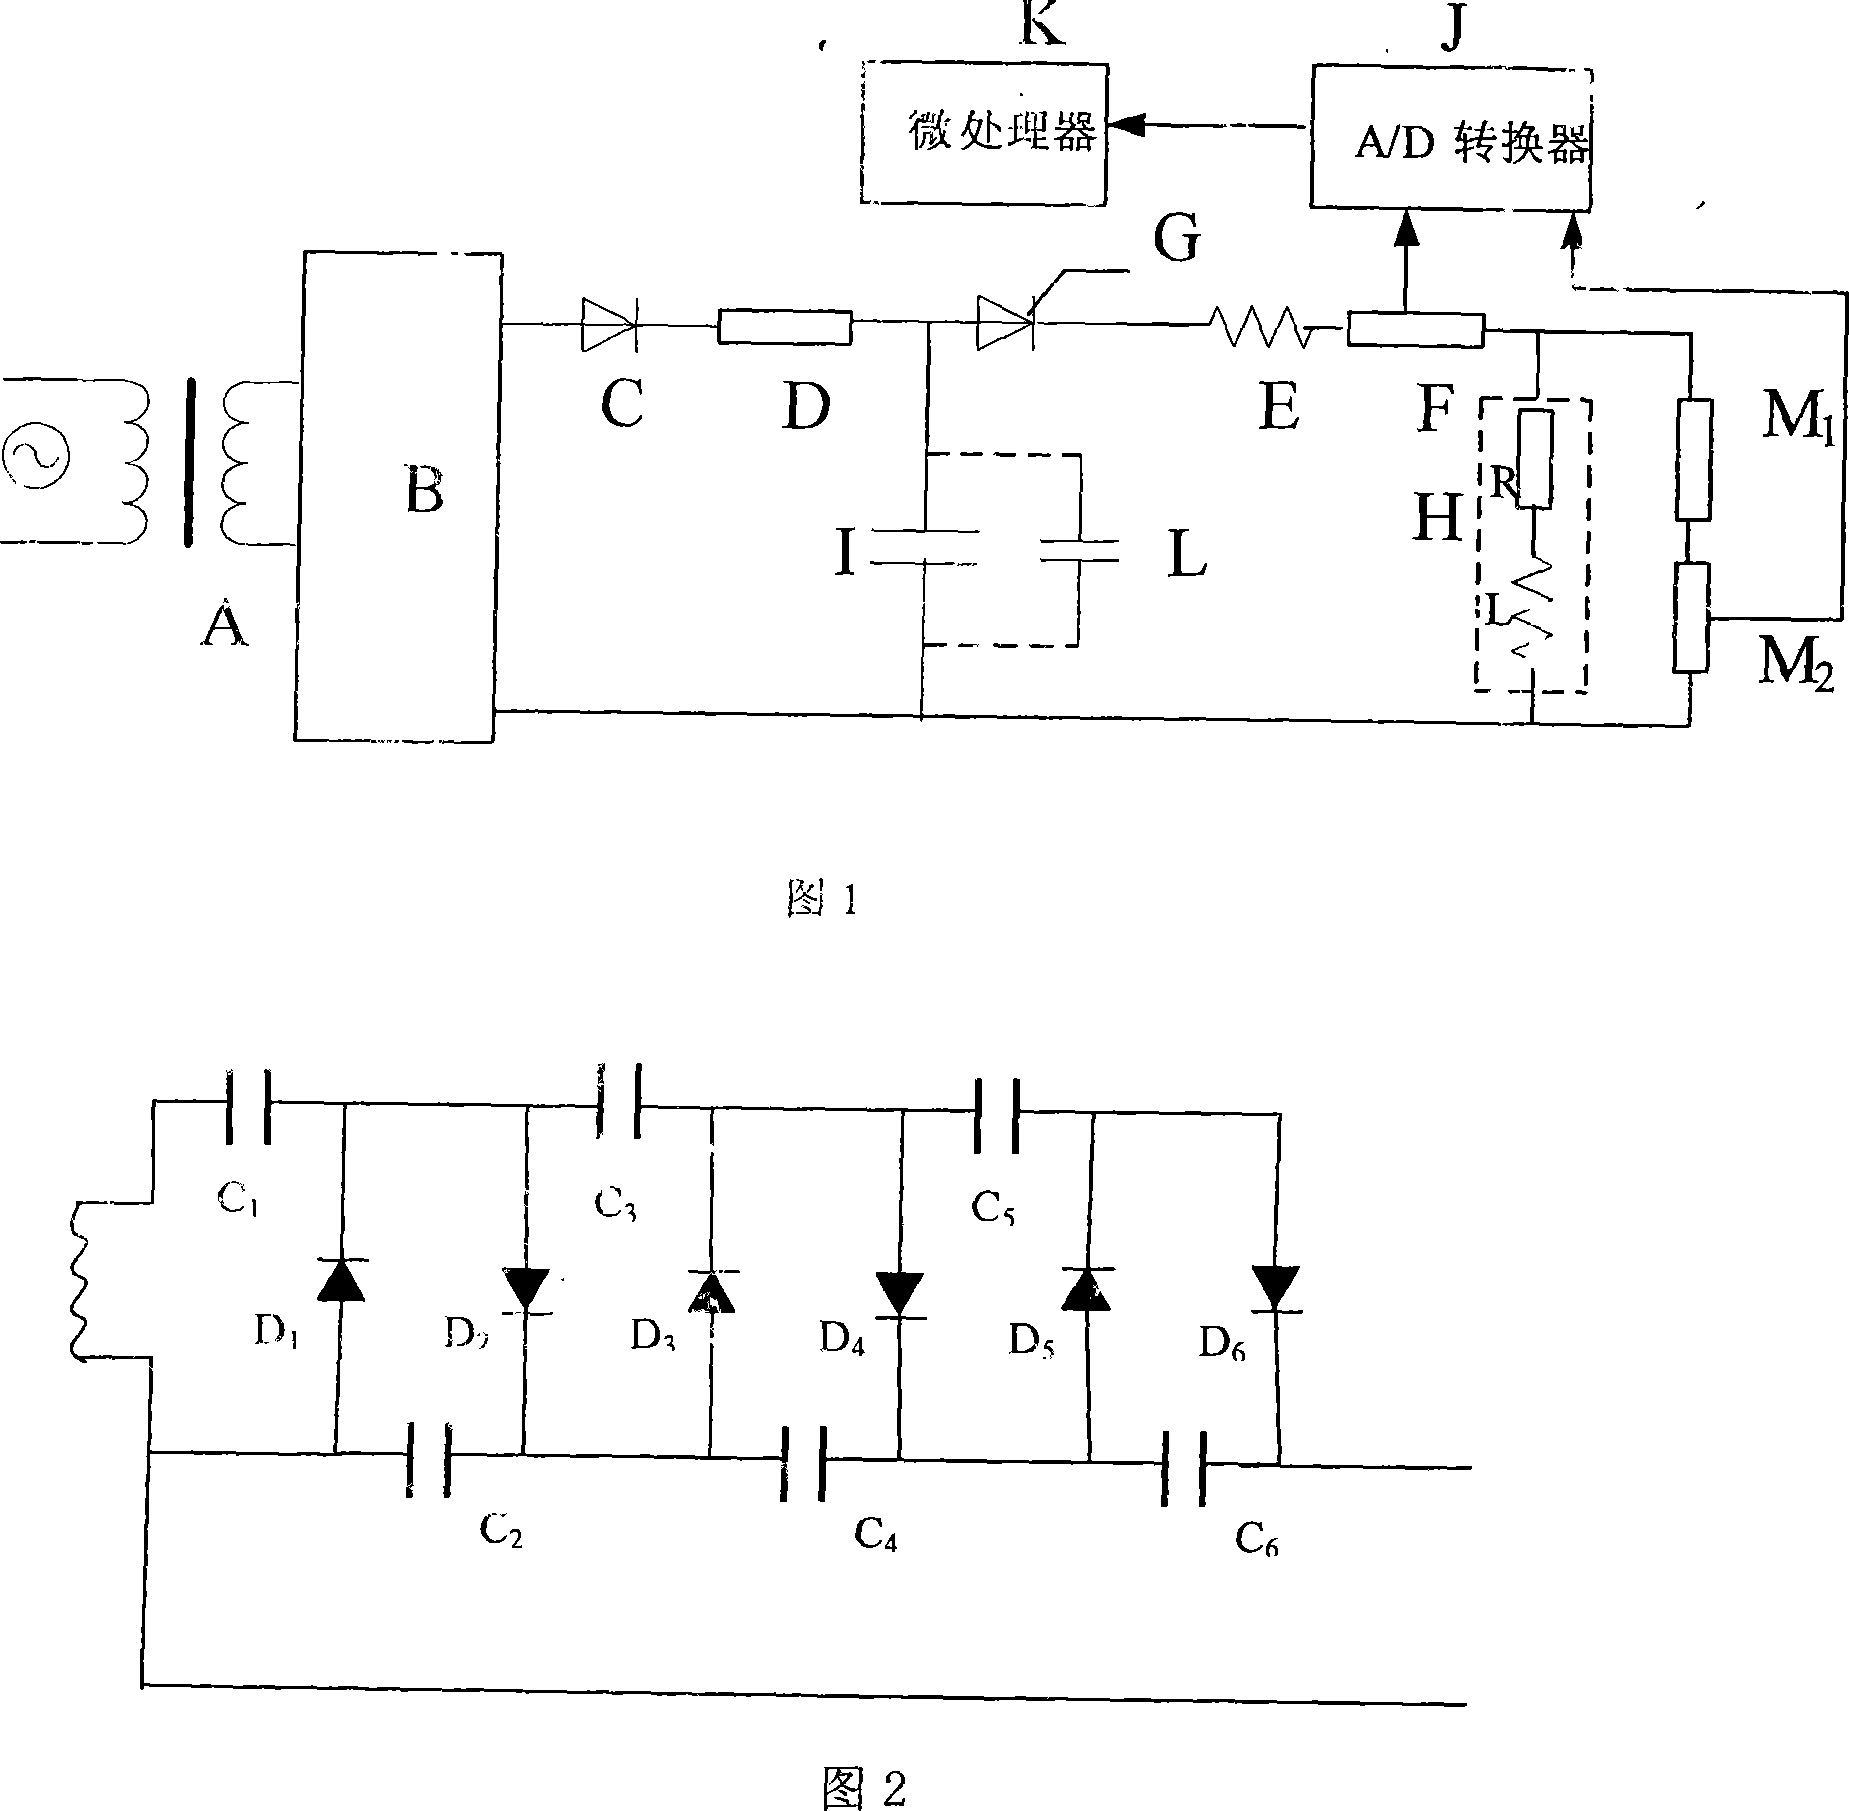 System and method for applying impact current for measuring grounded screen electric resistance and inductor